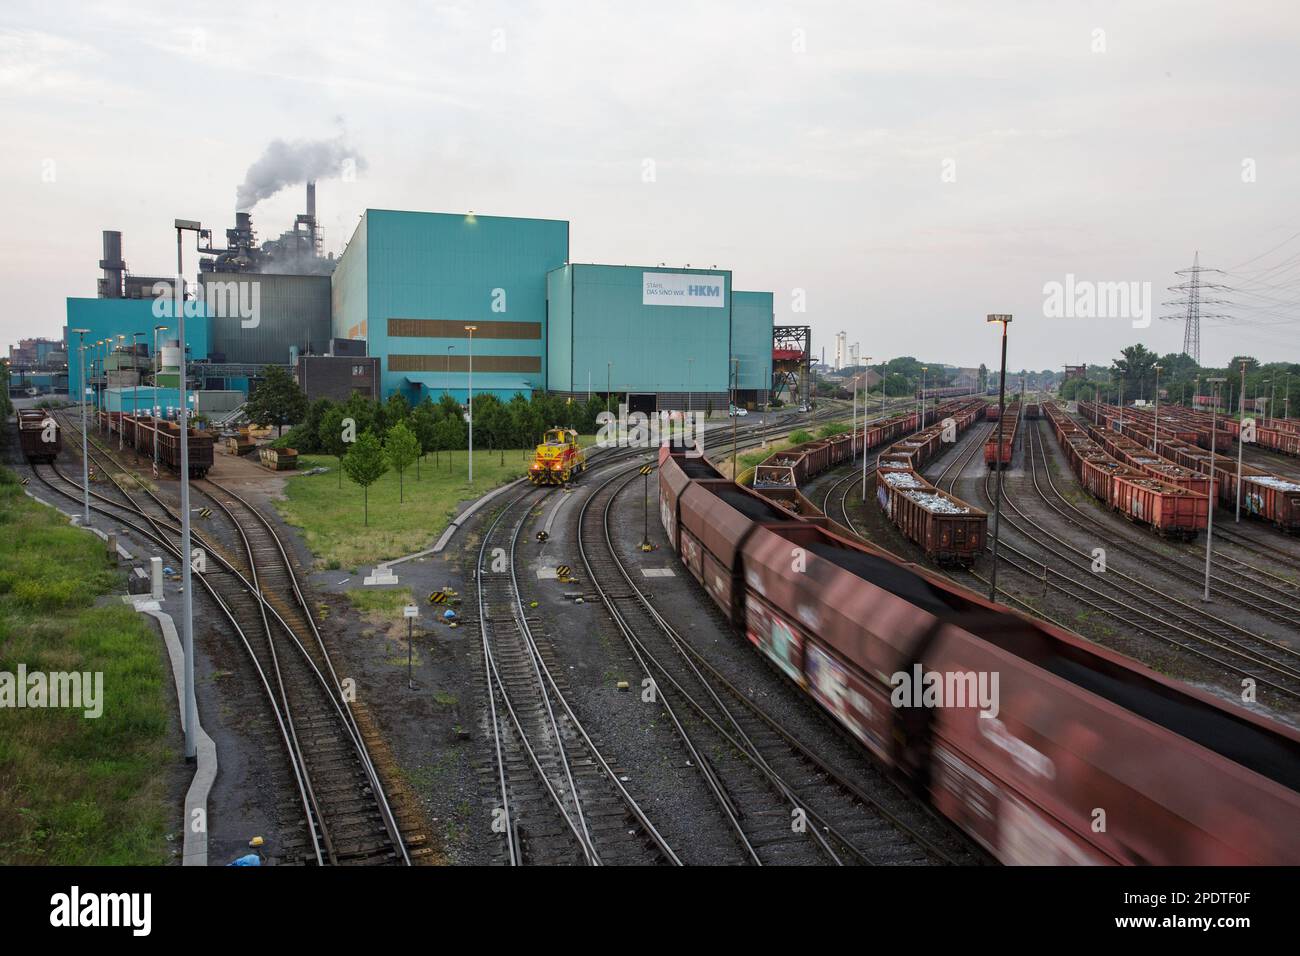 DUISBURG, GERMANY. 31 May, 2018. HKM Steelworks in Duisburg, Germany. Credit: Ant Palmer/Alamy Stock Photo